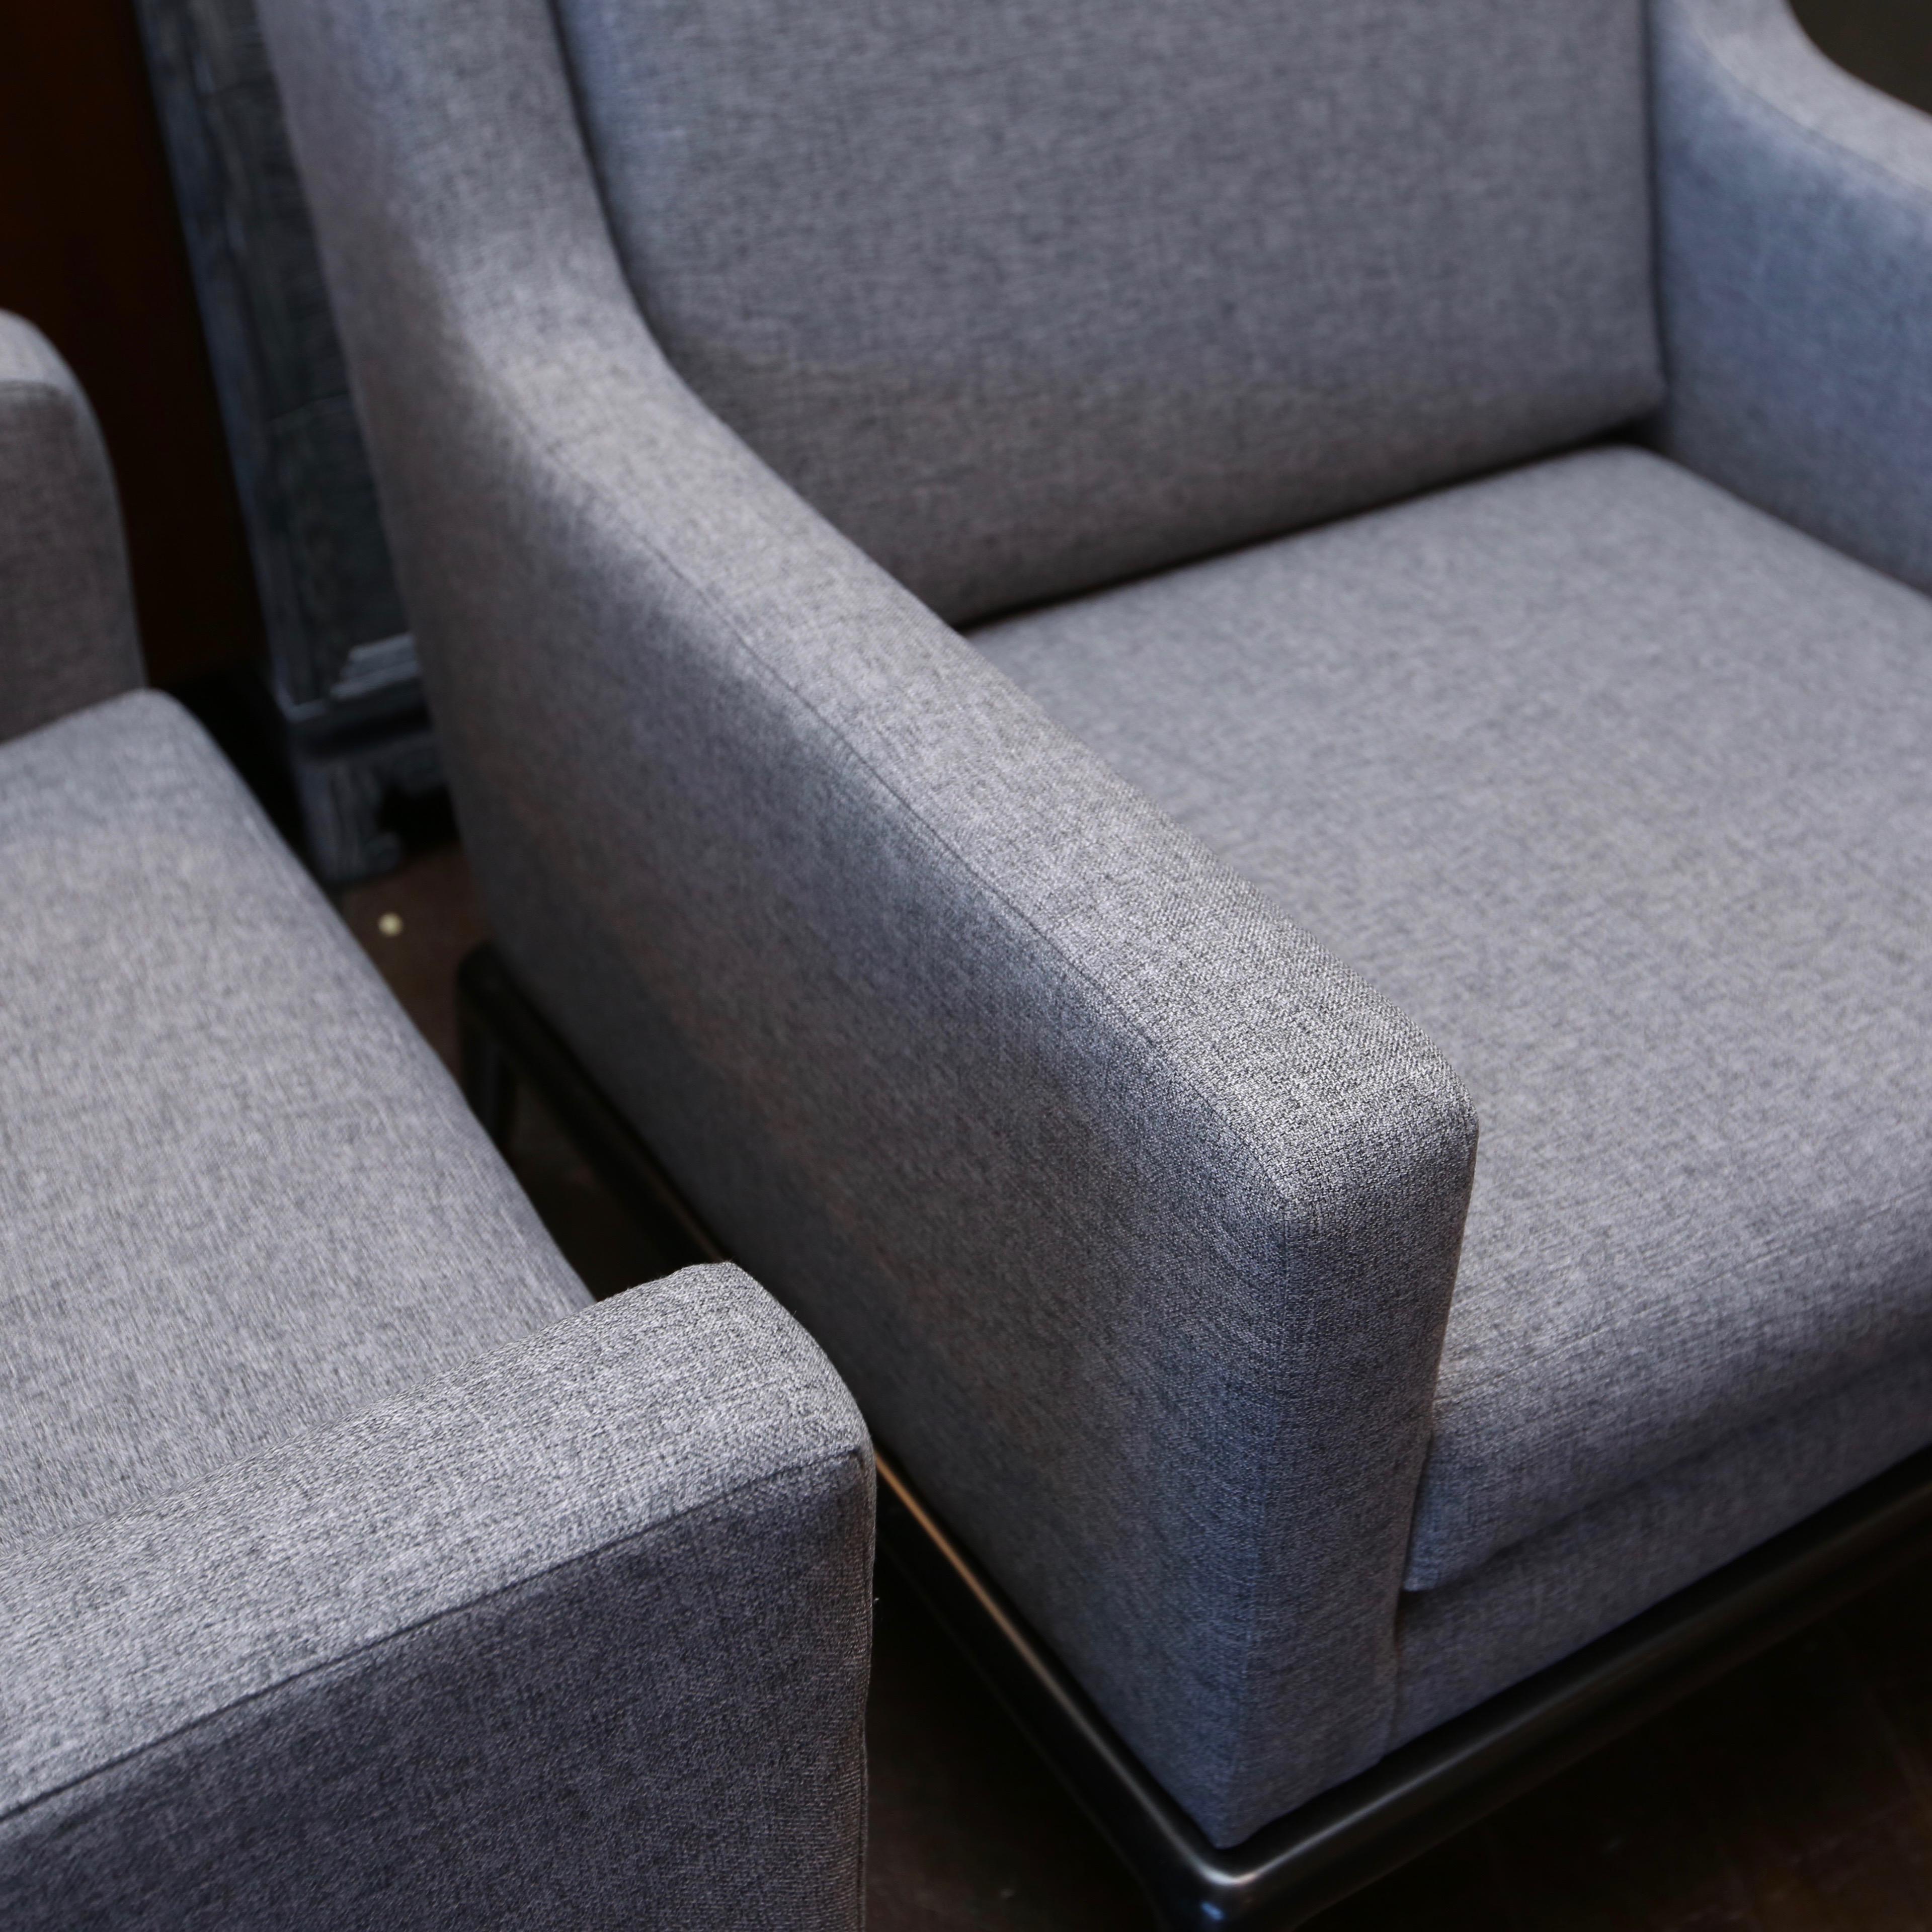 1980s era chairs that have just been reupholstered in nice grey linen.